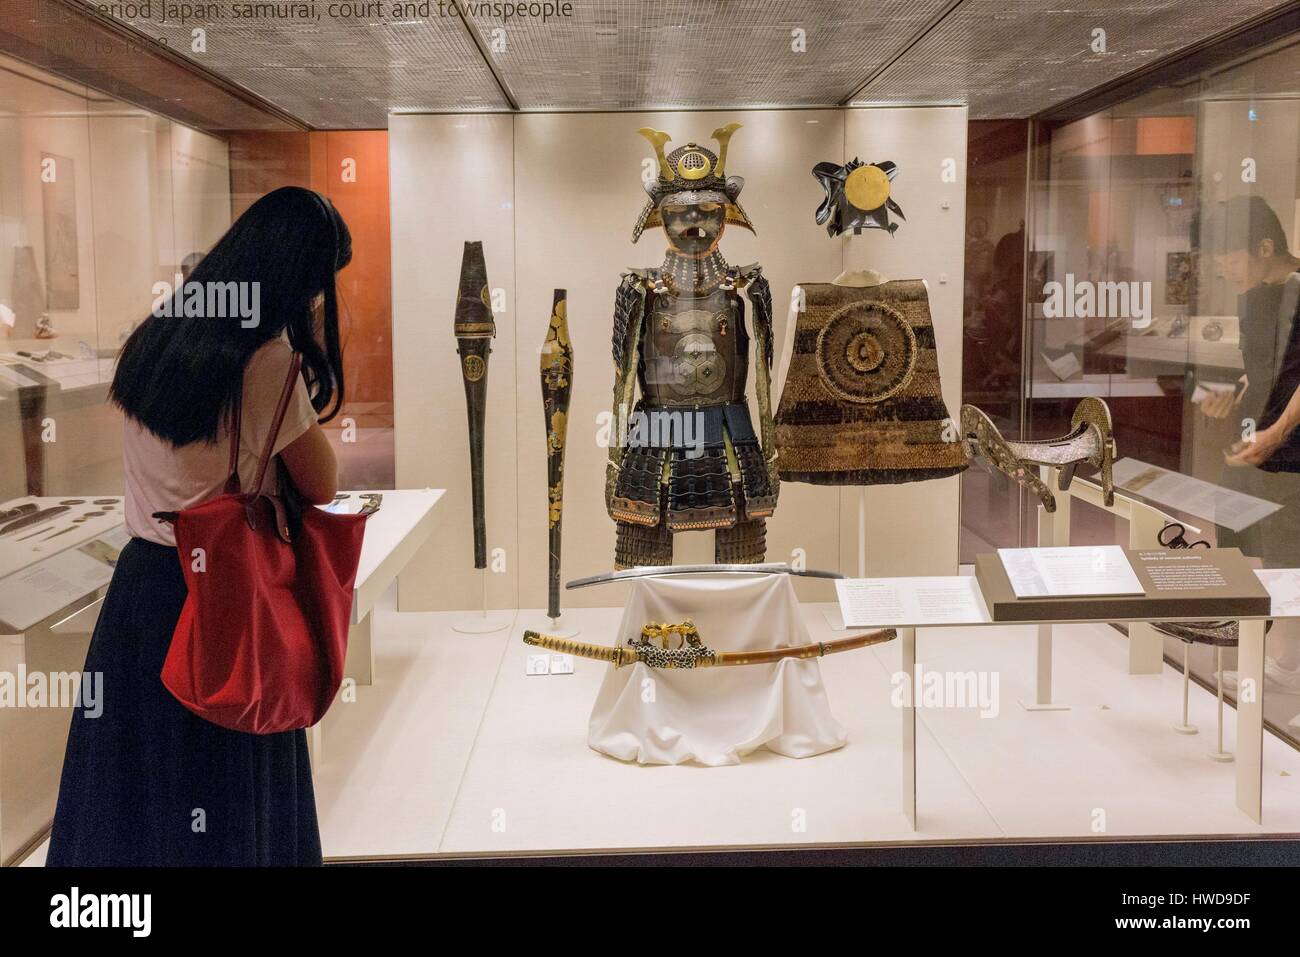 United Kingdom, London, Fitzrovia district, the British Museum, the rooms  dedicated to Japan, armor, helmet and sword of samurai, visitors watching  the window Stock Photo - Alamy